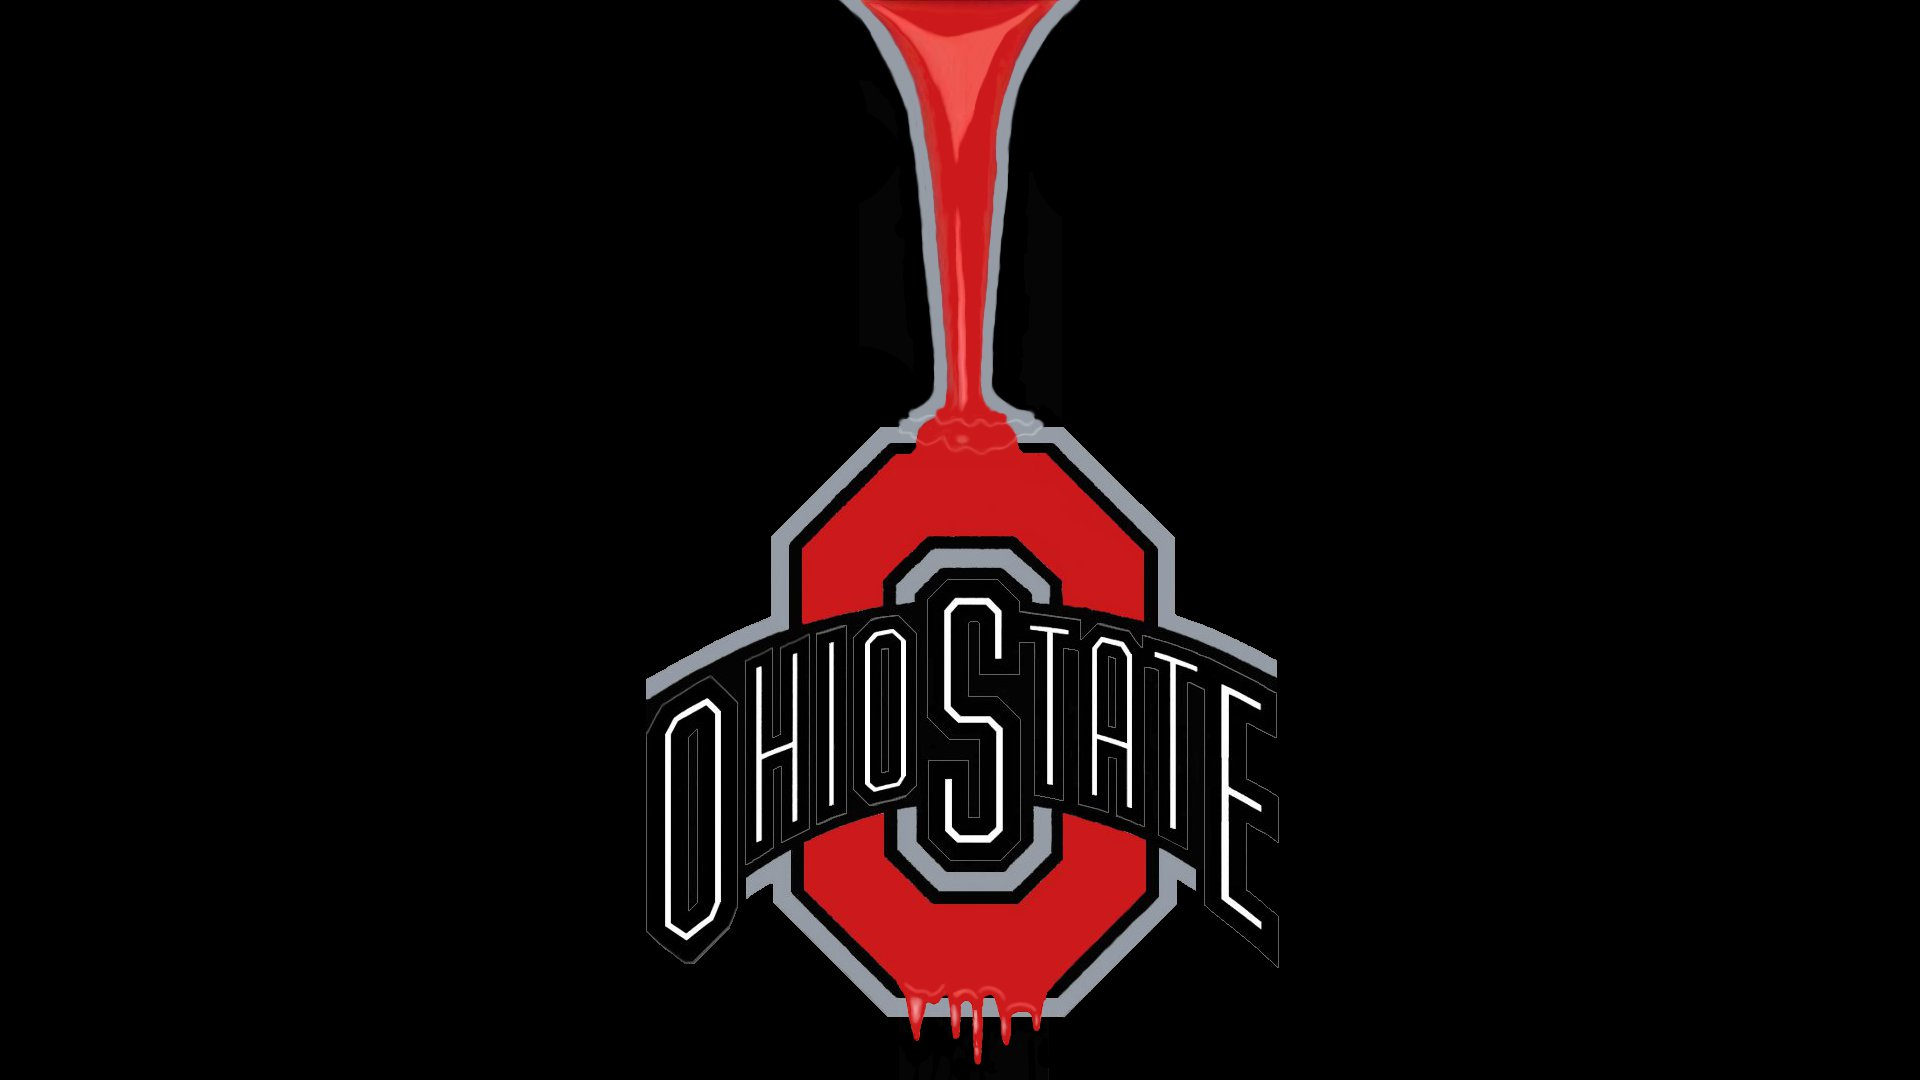 1920x1080 Free download OSU Wallpaper 202 Ohio State Football Wallpaper 29072199 [] for your Desktop, Mobile \u0026 Tablet | Explore 75+ Ohio State Wallpaper | Ohio State Football Wallpaper Pictures, Ohio State Wallpaper